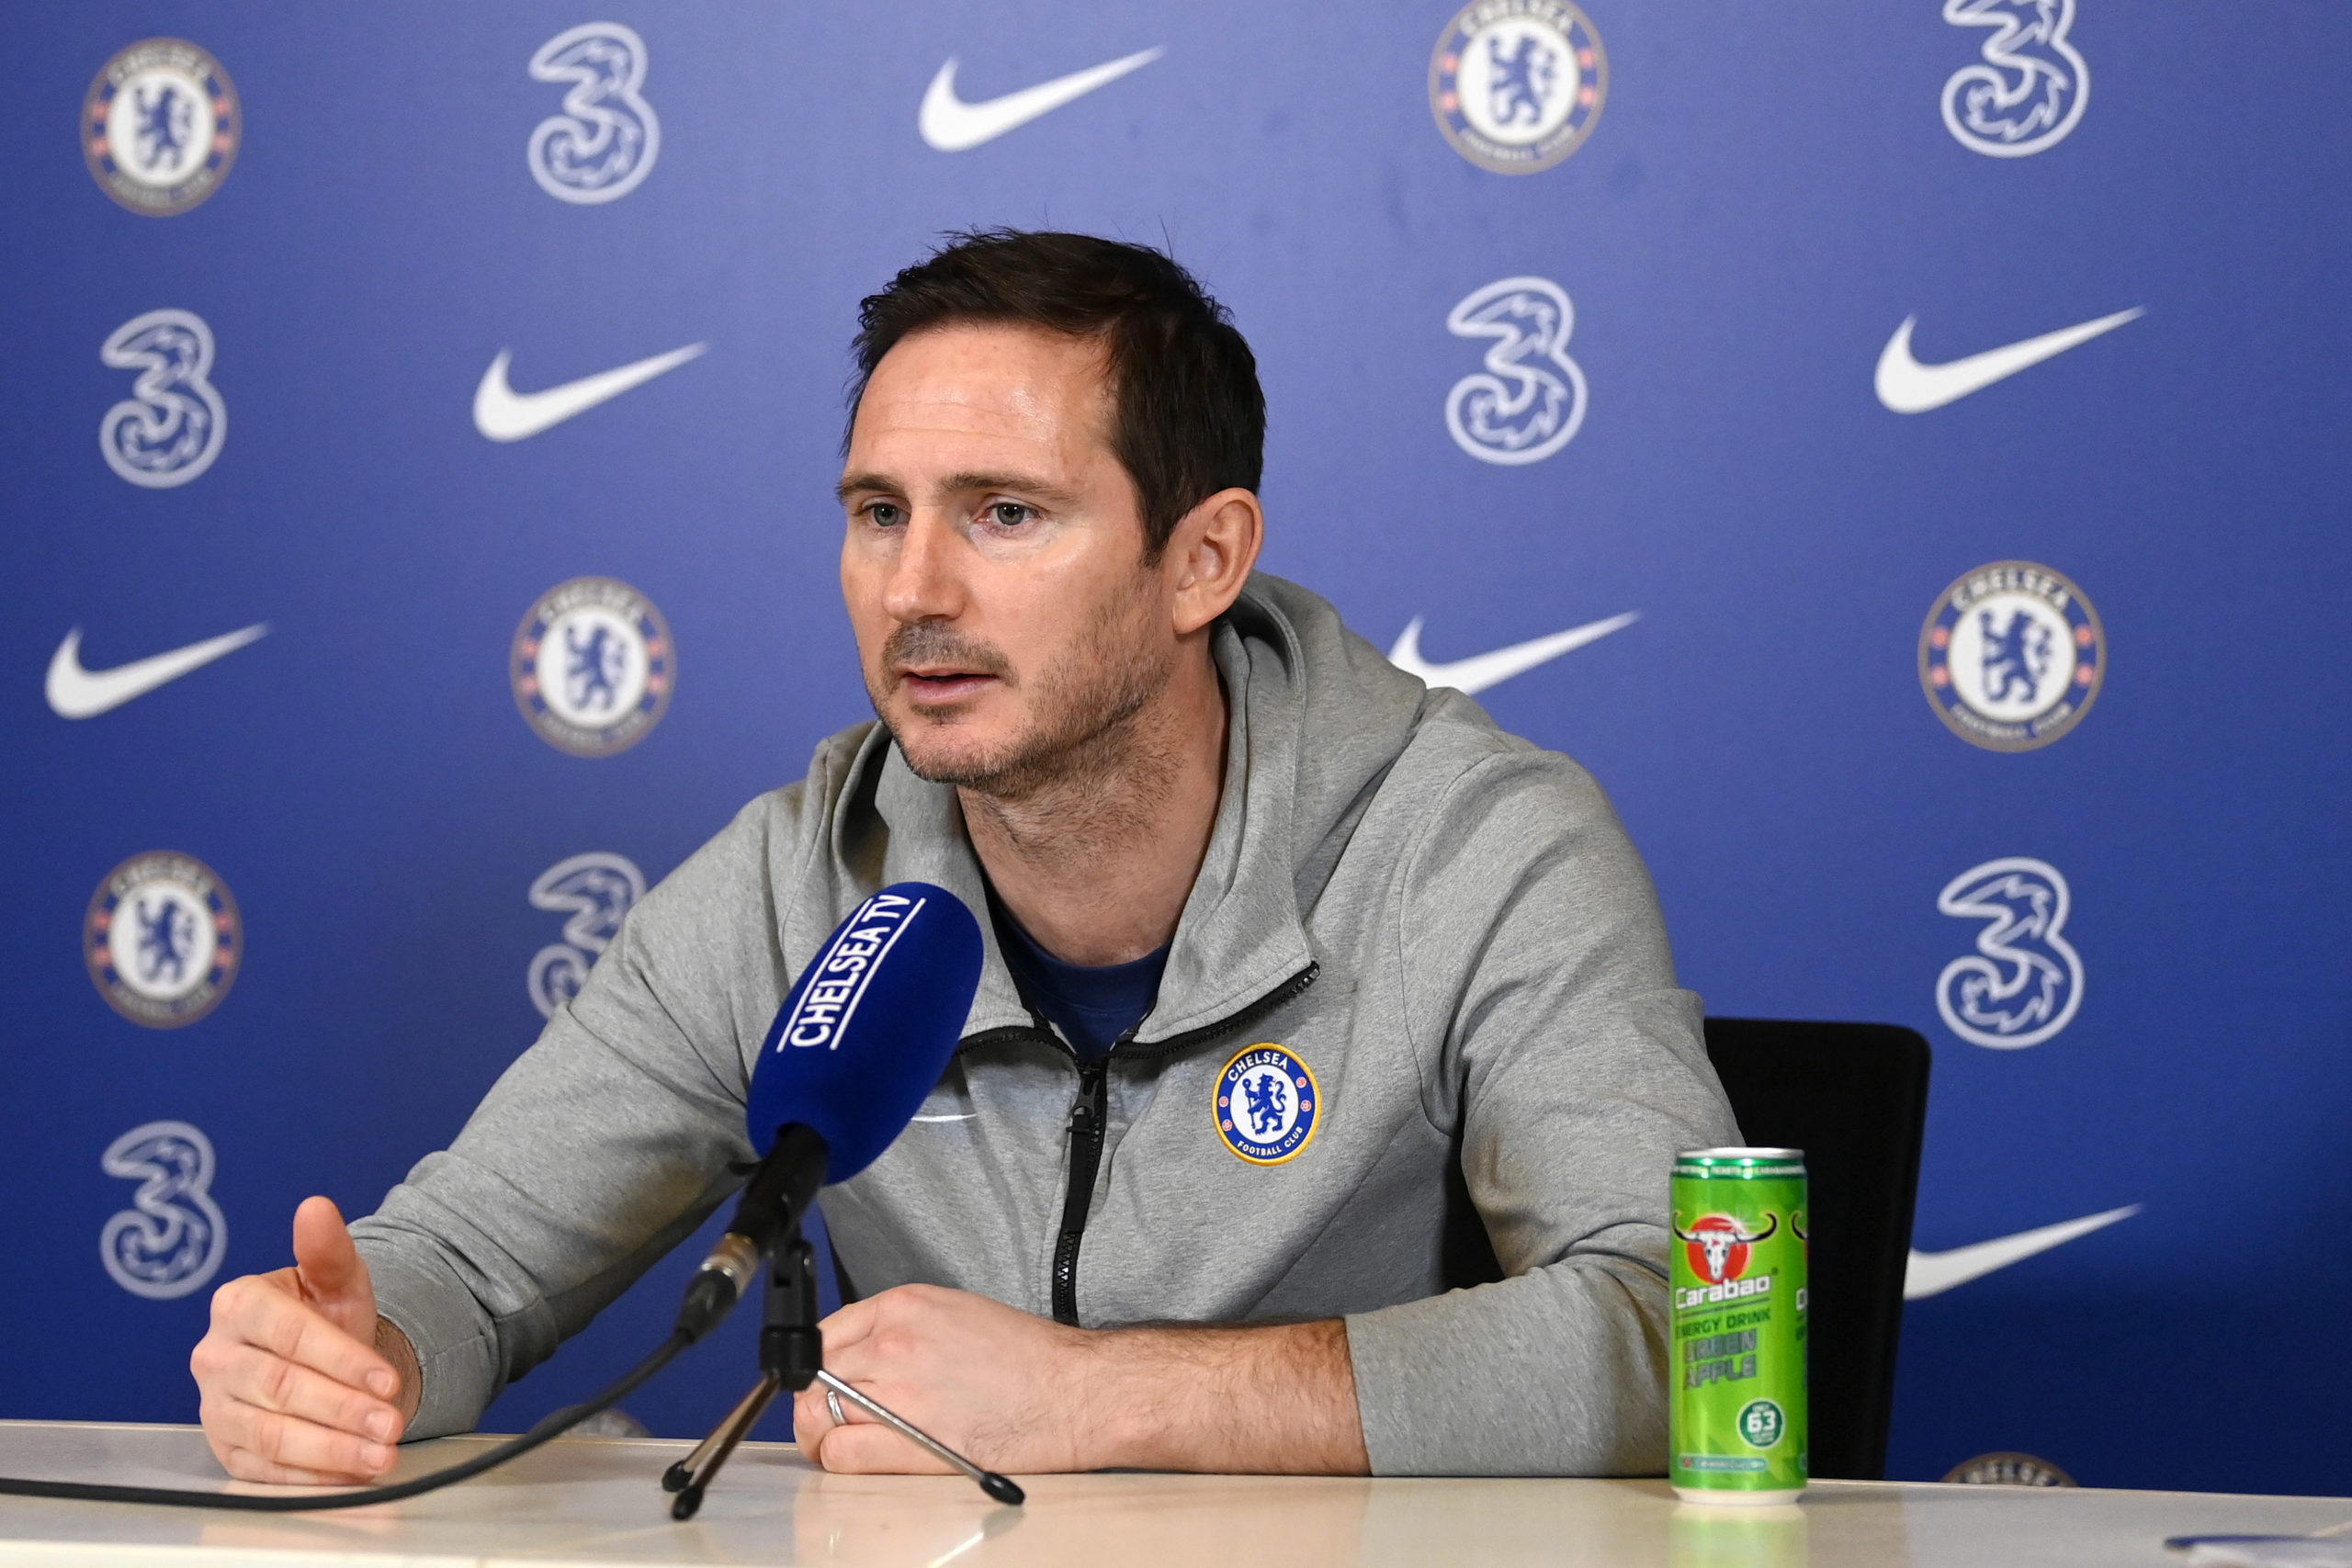 Yet another Lampard transfer masterstroke is starting to emerge with £120k-a-week Chelsea player - TCC View